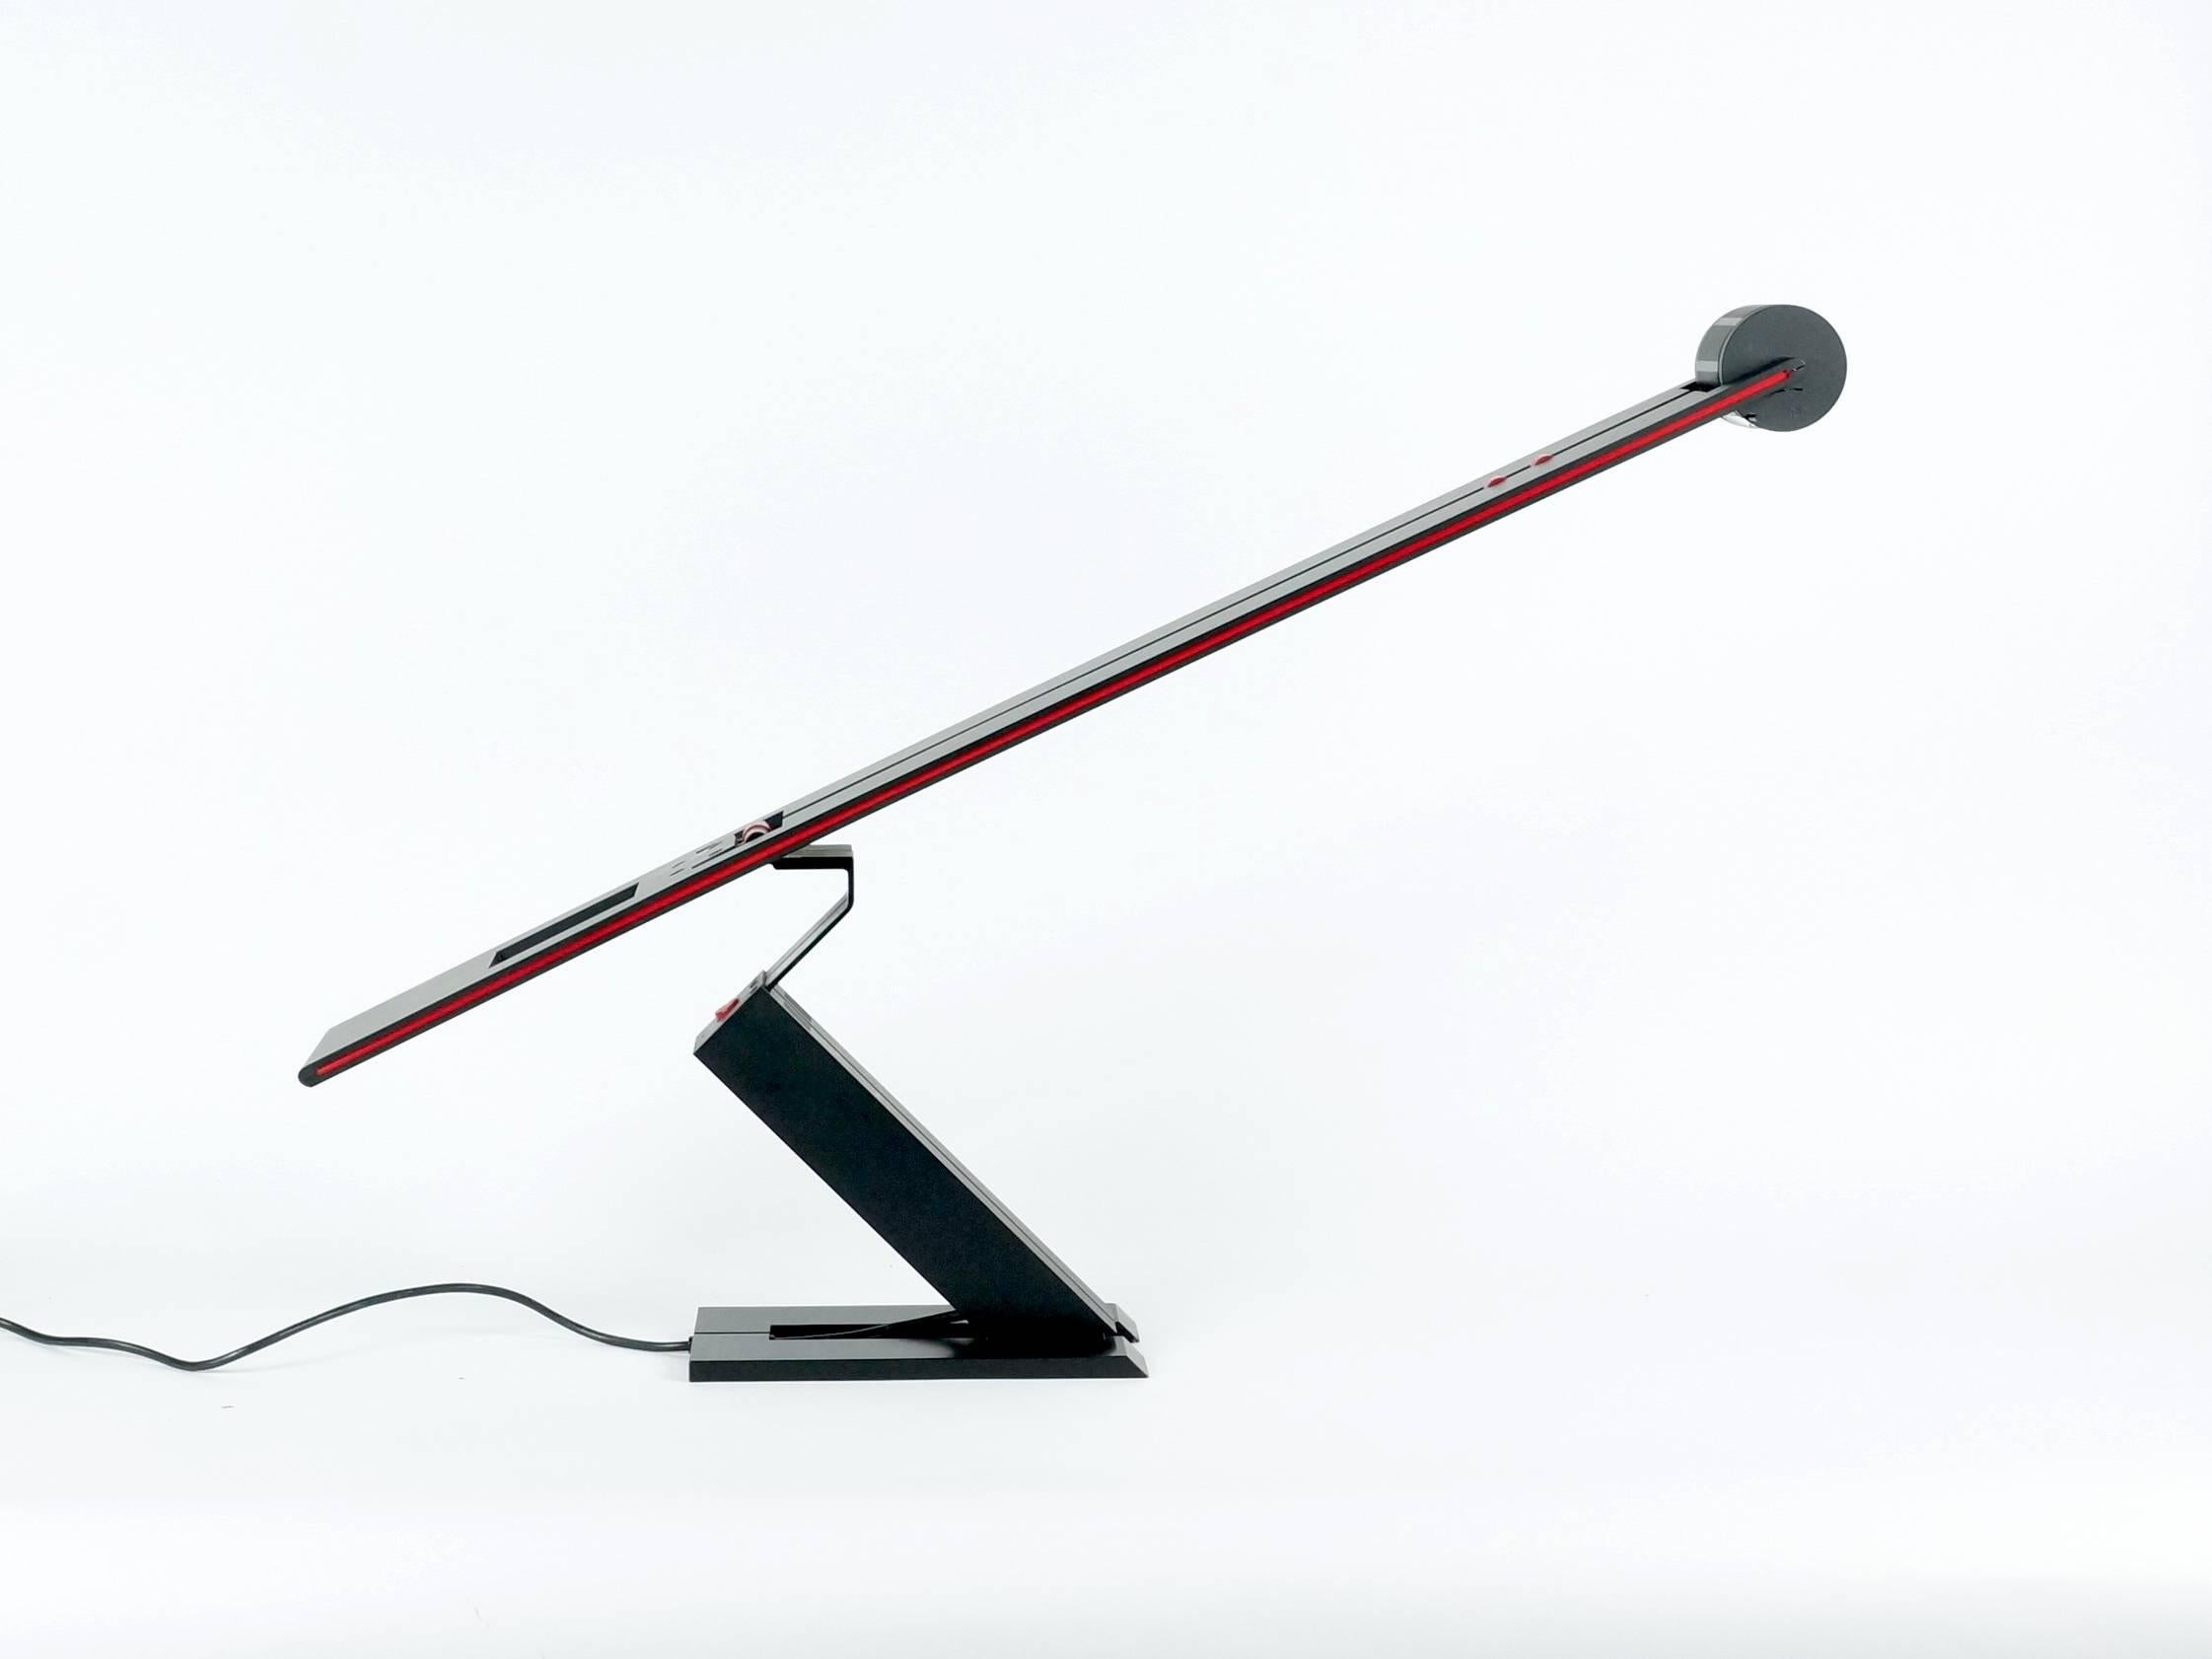 Rare and hard to find Melanos desk lamp designed by Mario Botta for Artemide, in perfect working condition. This desk lamp has an height adjustable arm and turnable head. Nice Minimalist piece that looks good ad any desk.